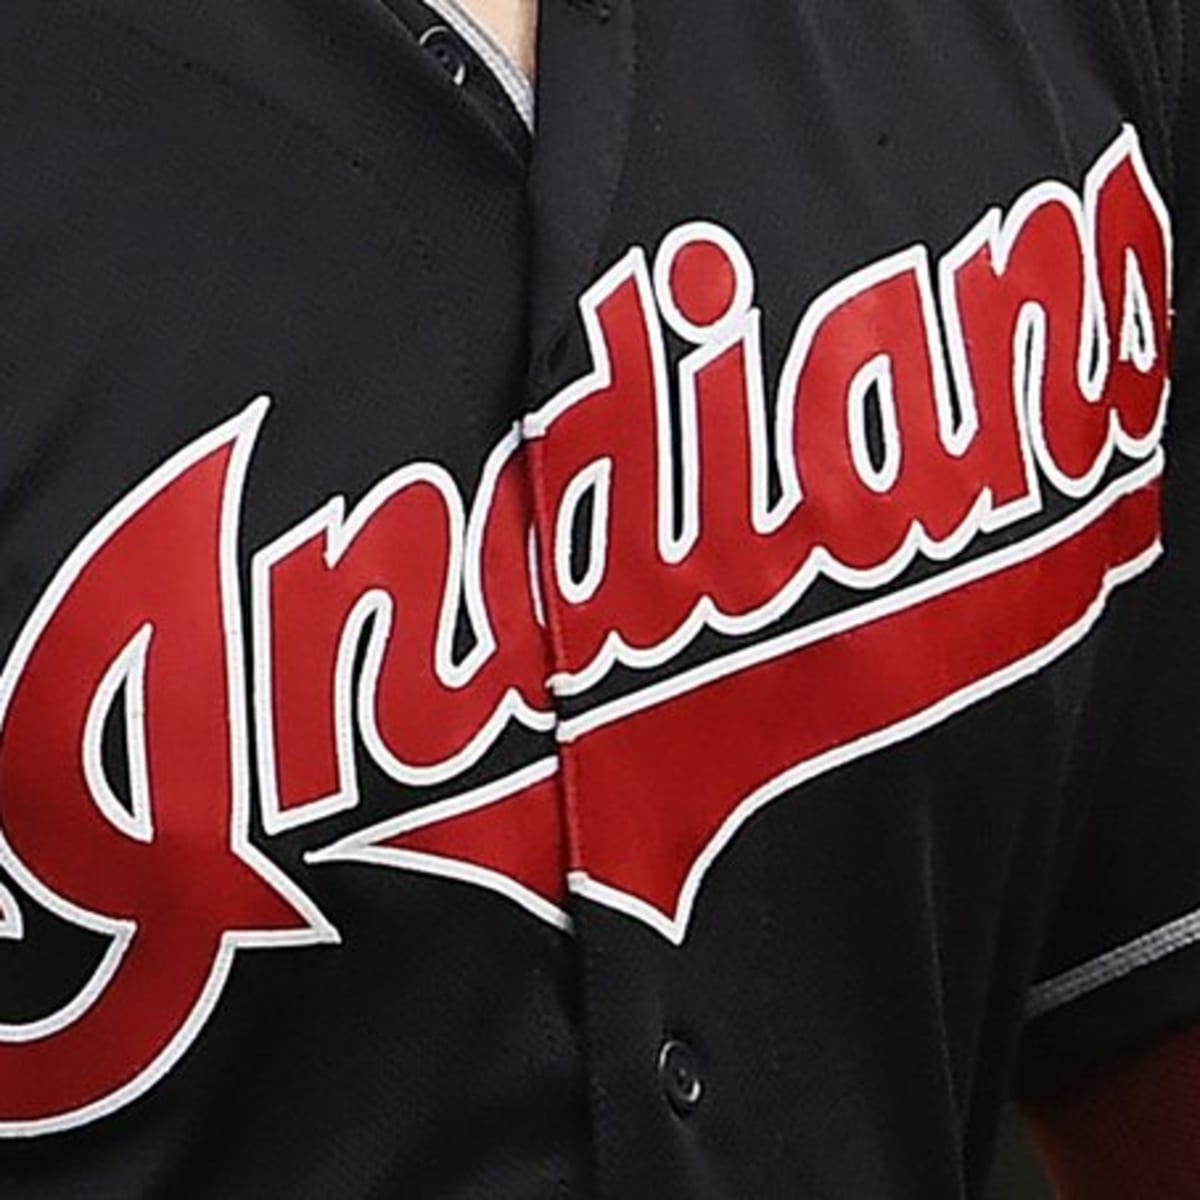 Cleveland Indigenous Groups to Indians Organization: Take the